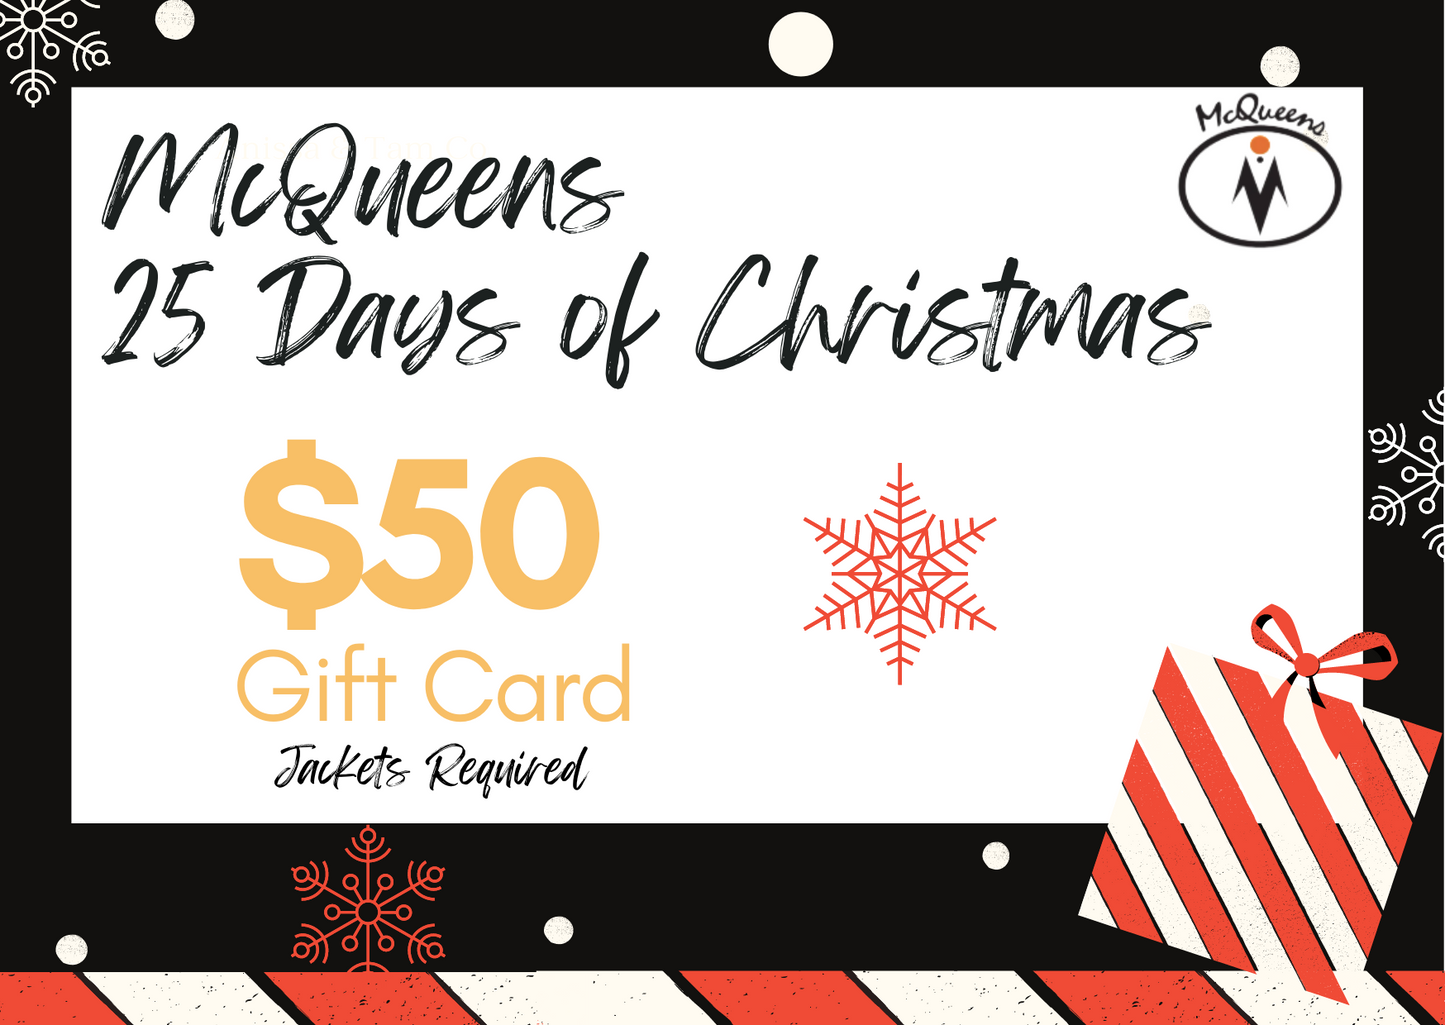 McQueens 25 Days of Christmas Gift Card